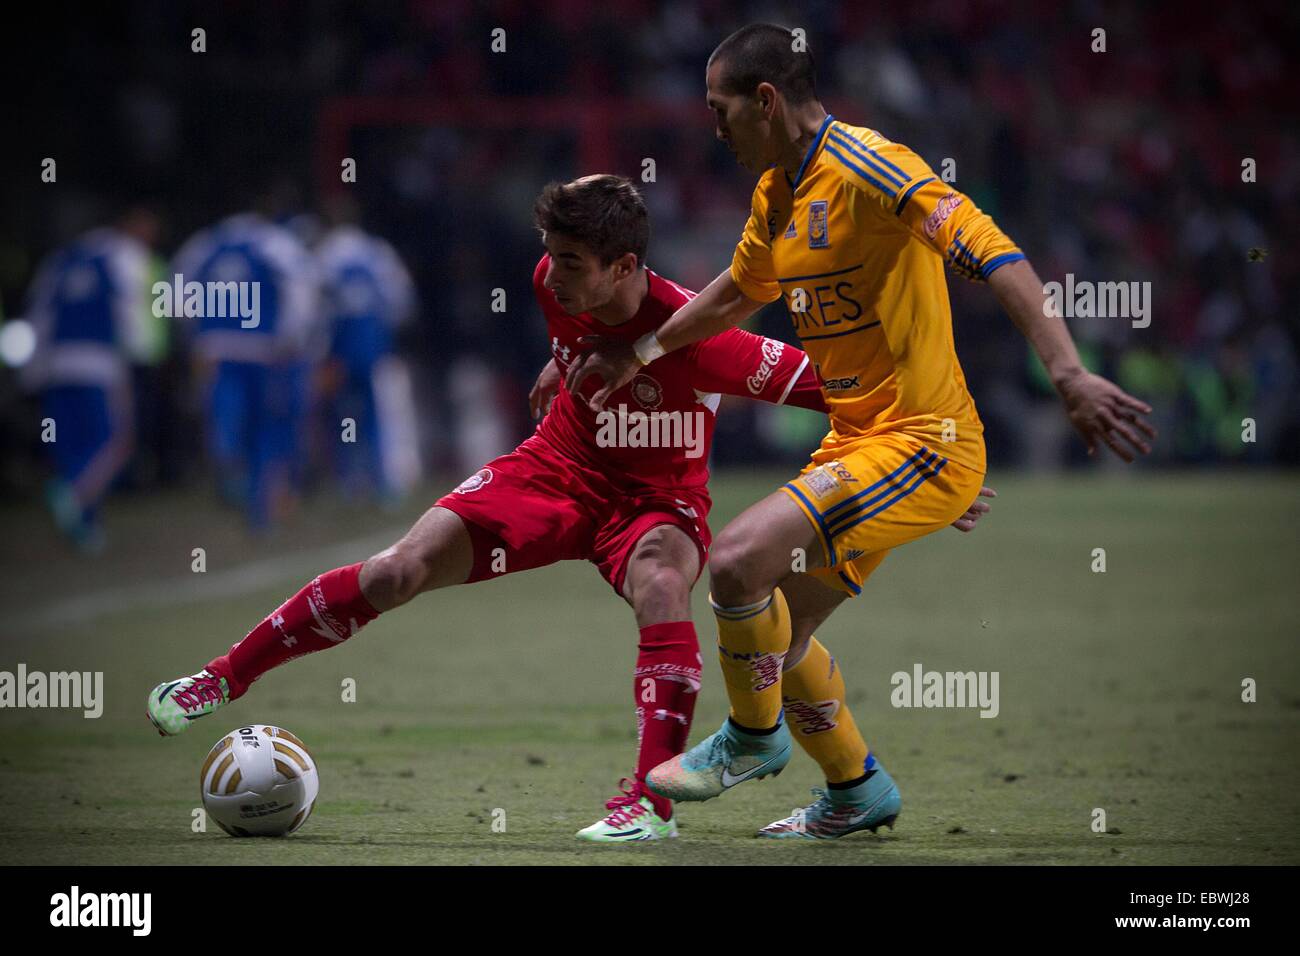 Toluca, Mexico. 4th Dec, 2014. Isaac Brizuela (L) of Toluca vies for the ball with Jorge Torres Nilo of Tigres during their semi-finals match of Opening Tournament of the MX League, at Nemesio Diez Stadium, in Toluca, Mexico State, Mexico, on Dec. 4, 2014. © Alejandro Ayala/Xinhua/Alamy Live News Stock Photo